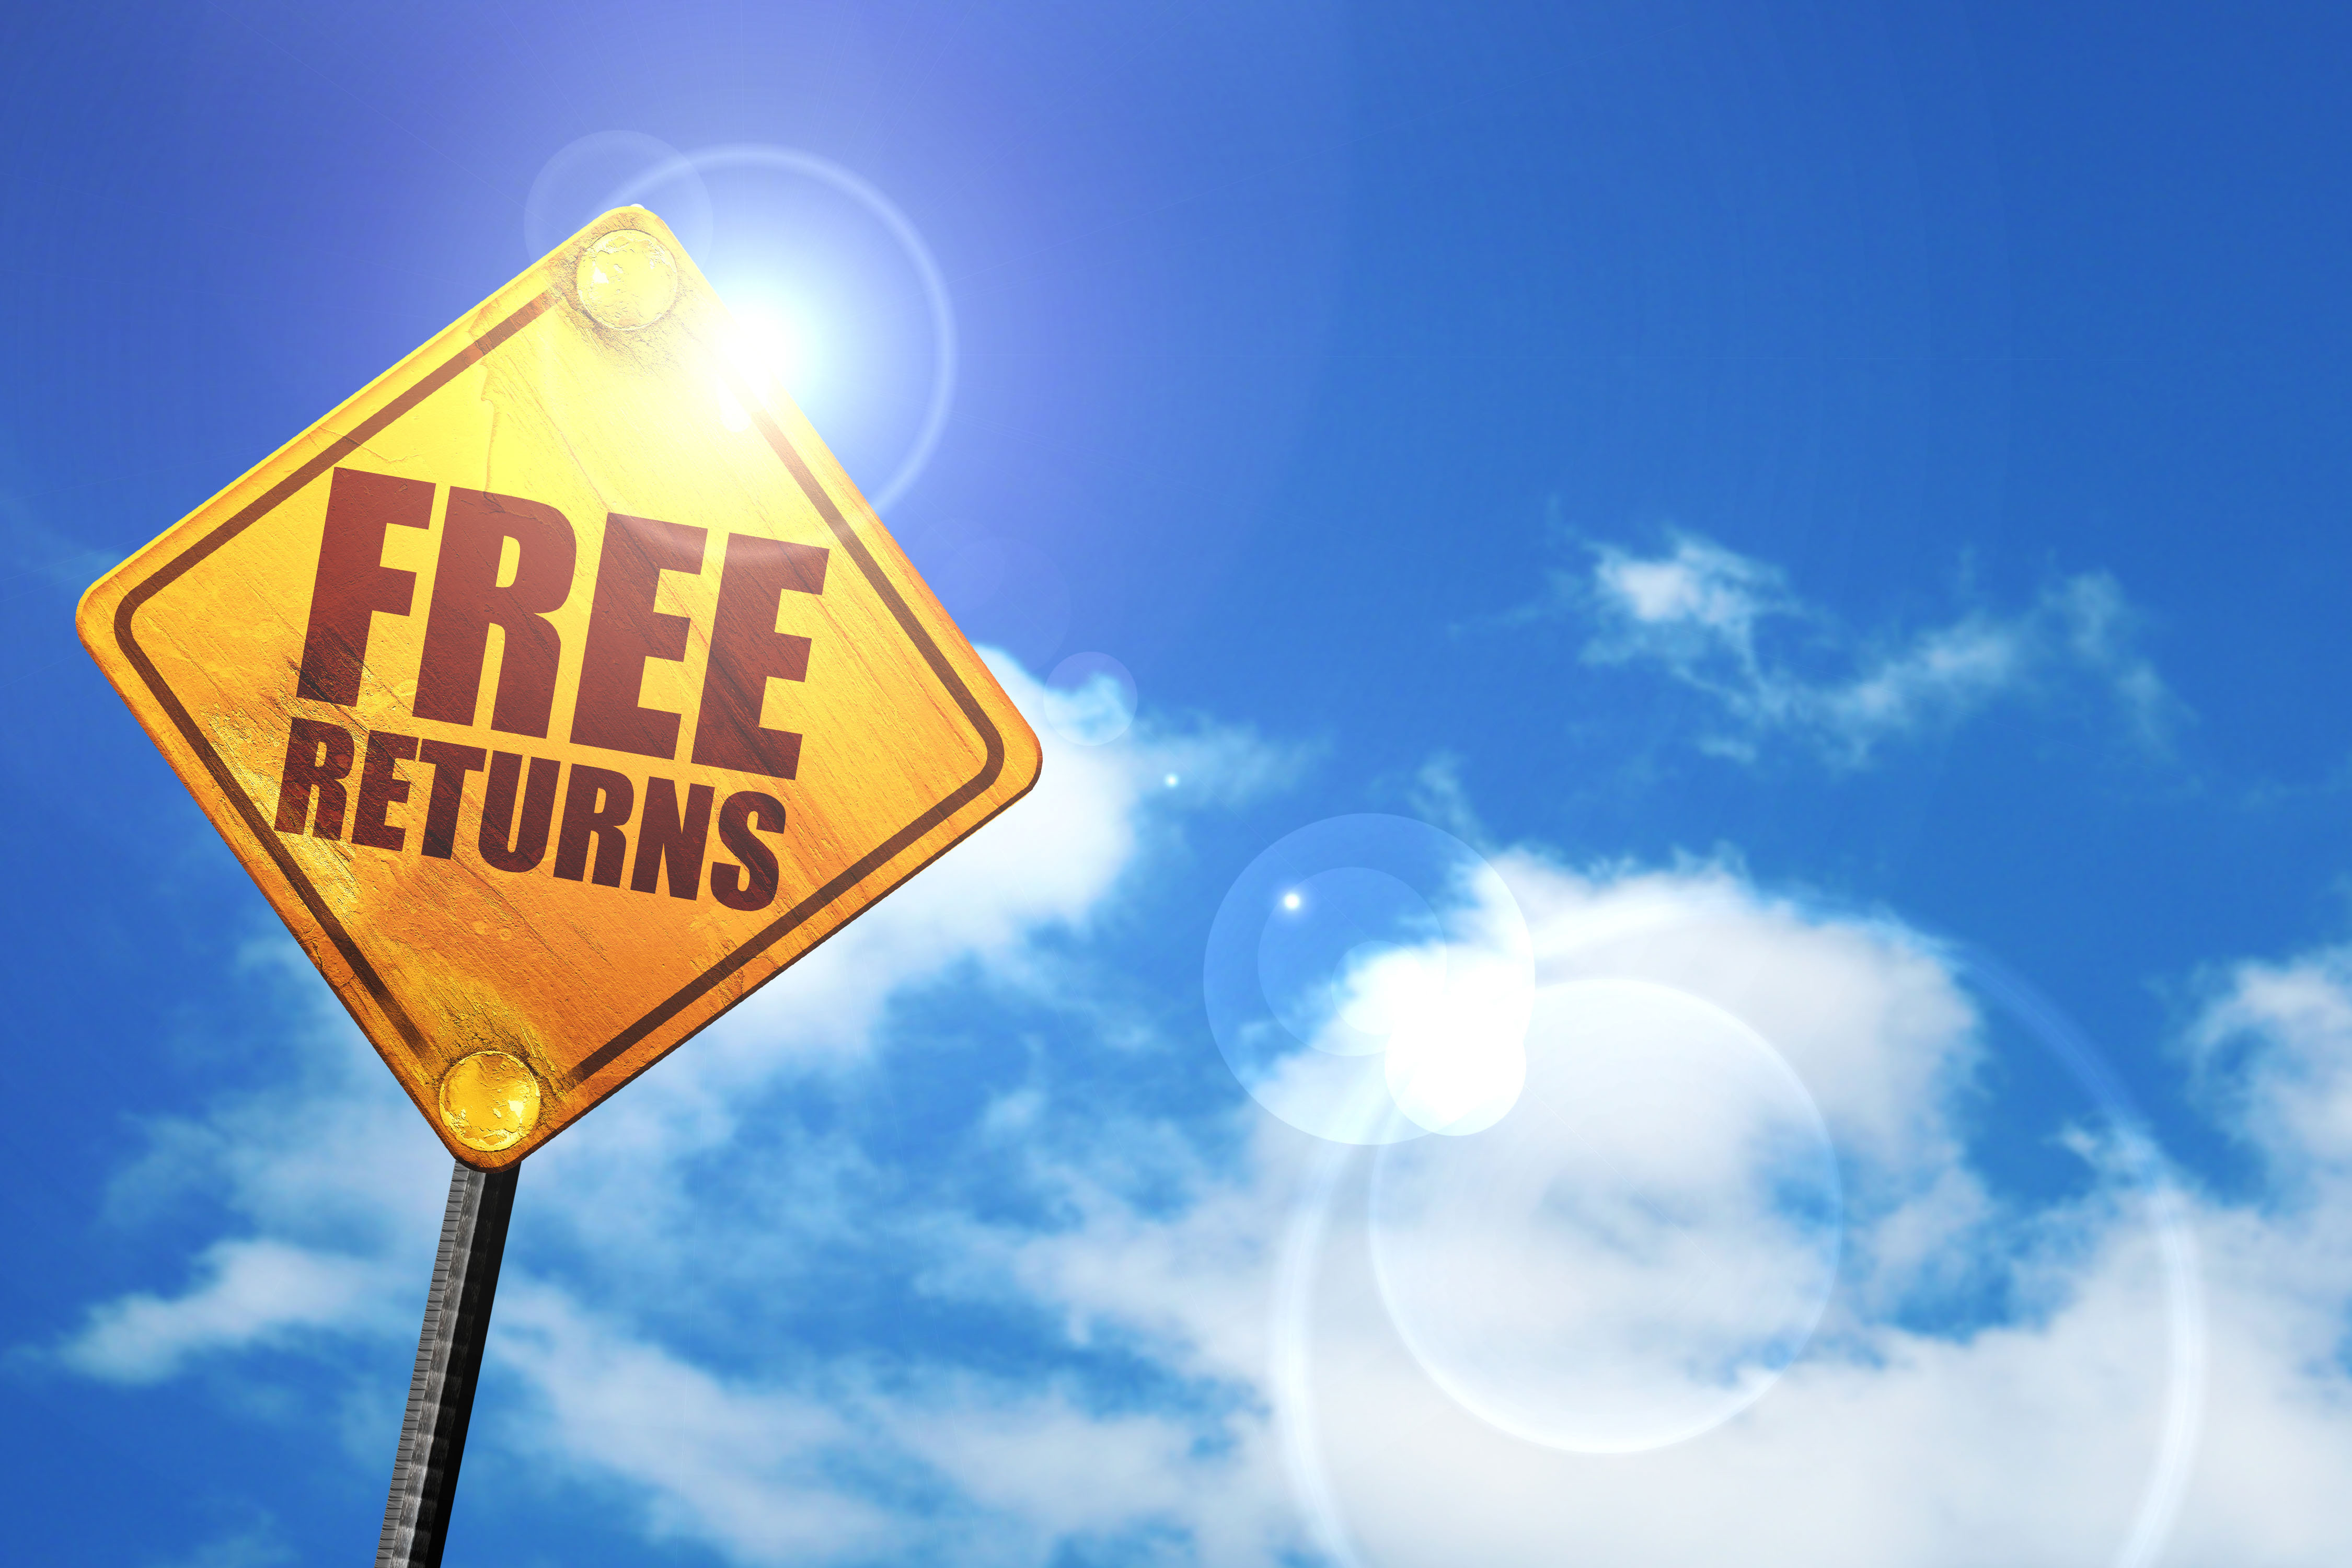 Should you offer Free Returns? Yes